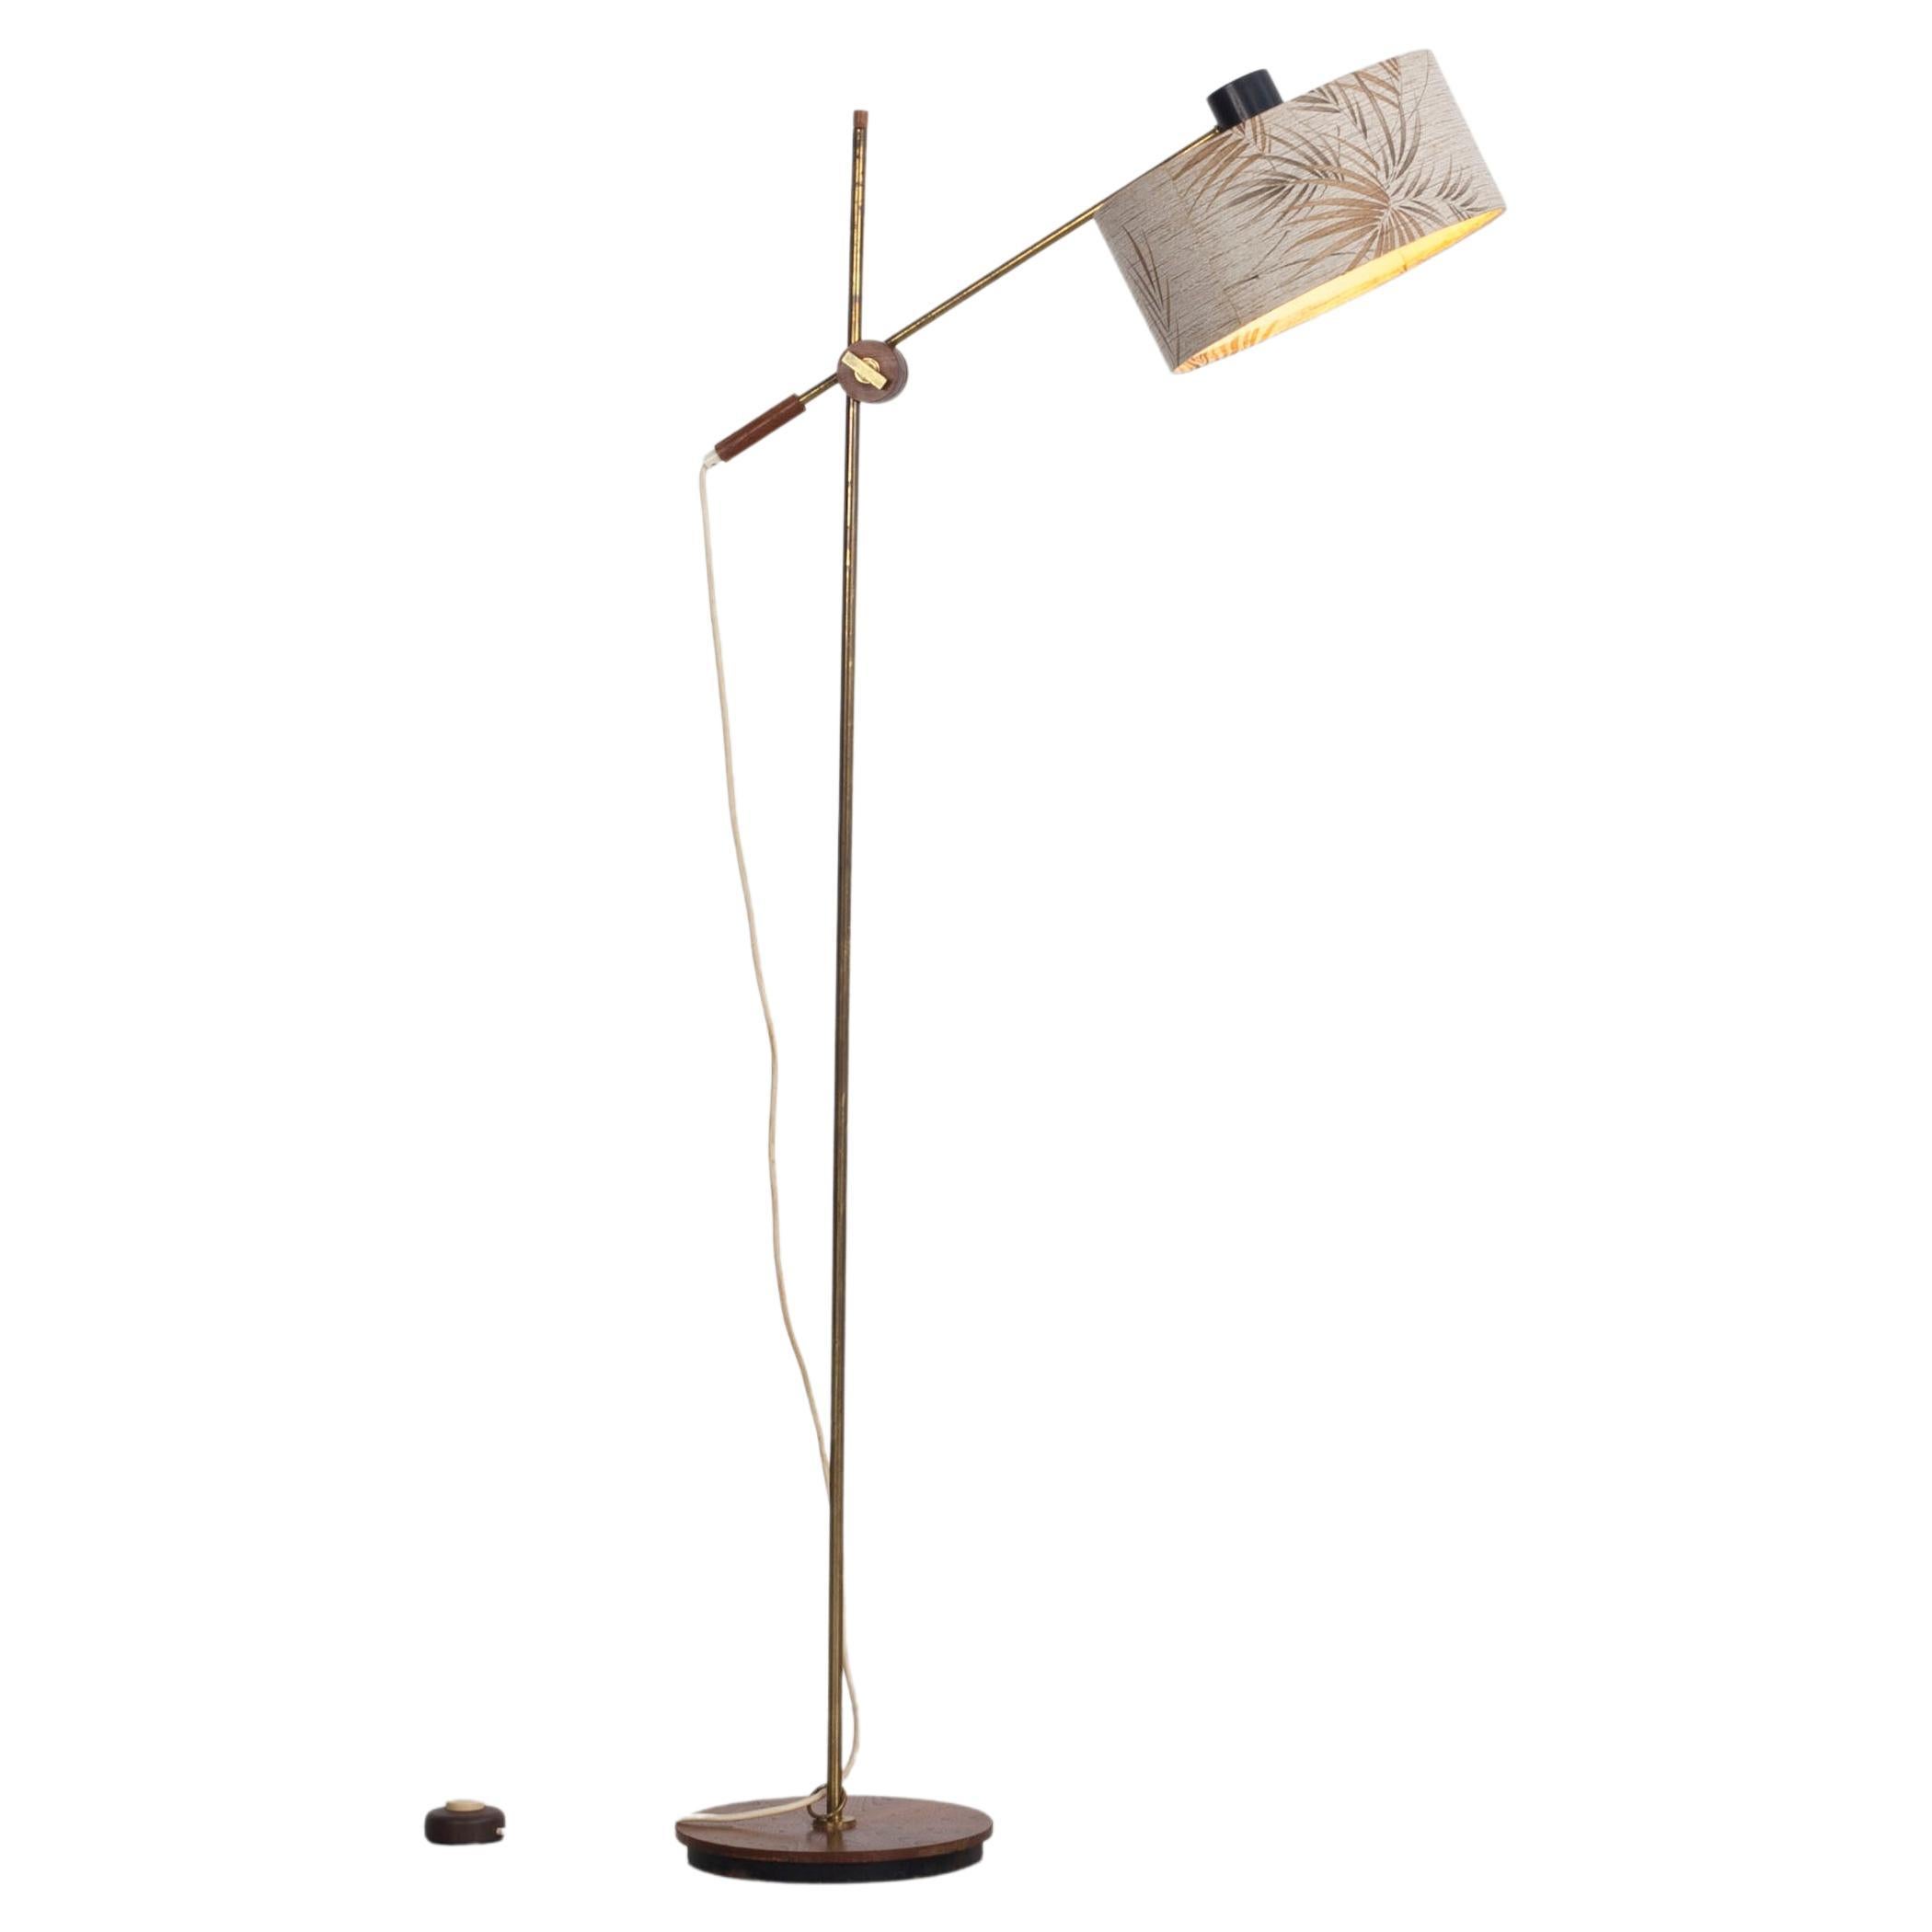 60s Floor Lamp with Adjustable Height and Position Lampshade